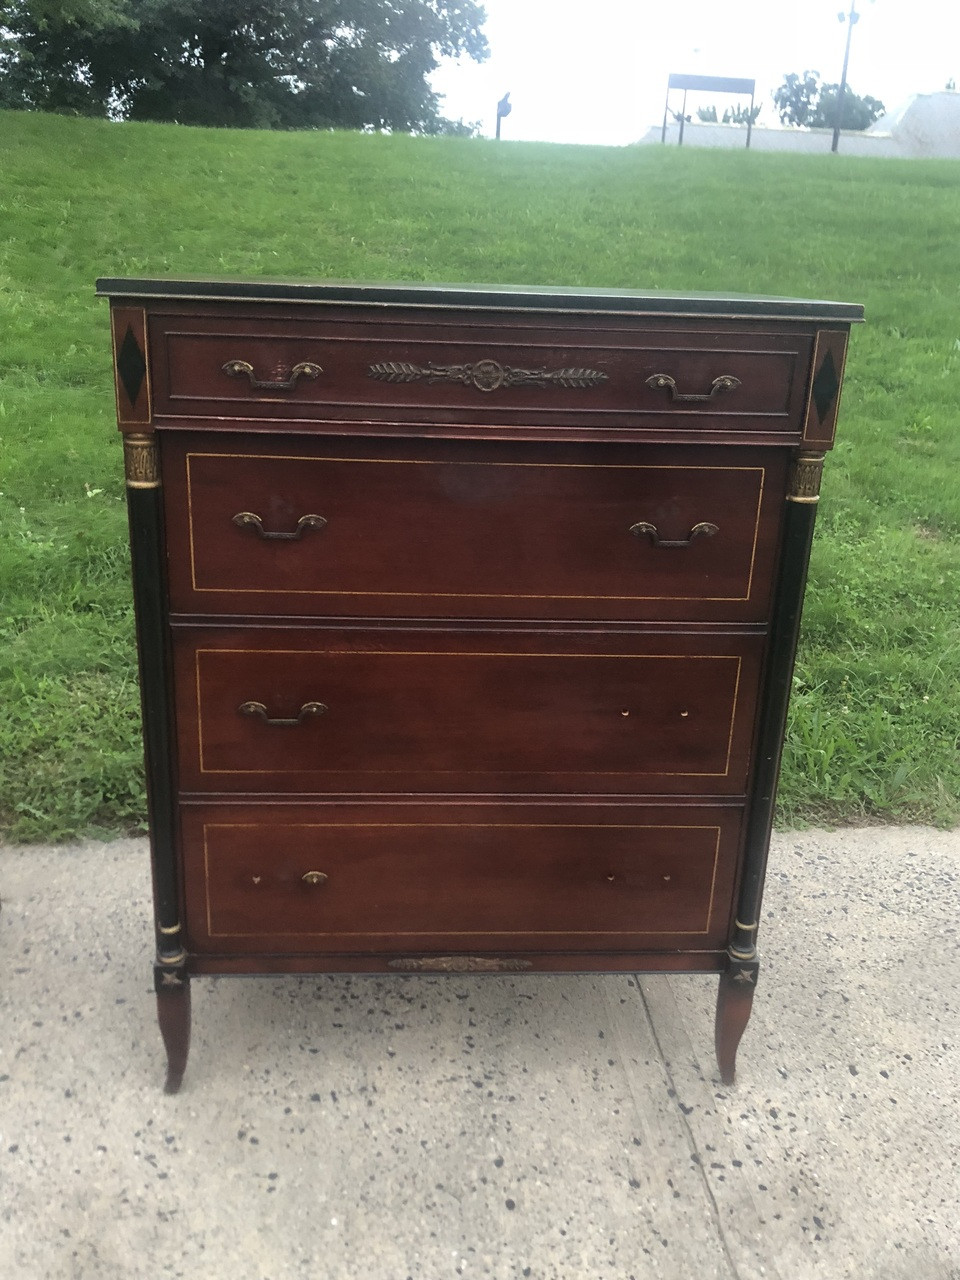 Antique Mahogany And Black Tall 4 Drawer Dresser Forgotten Furniture